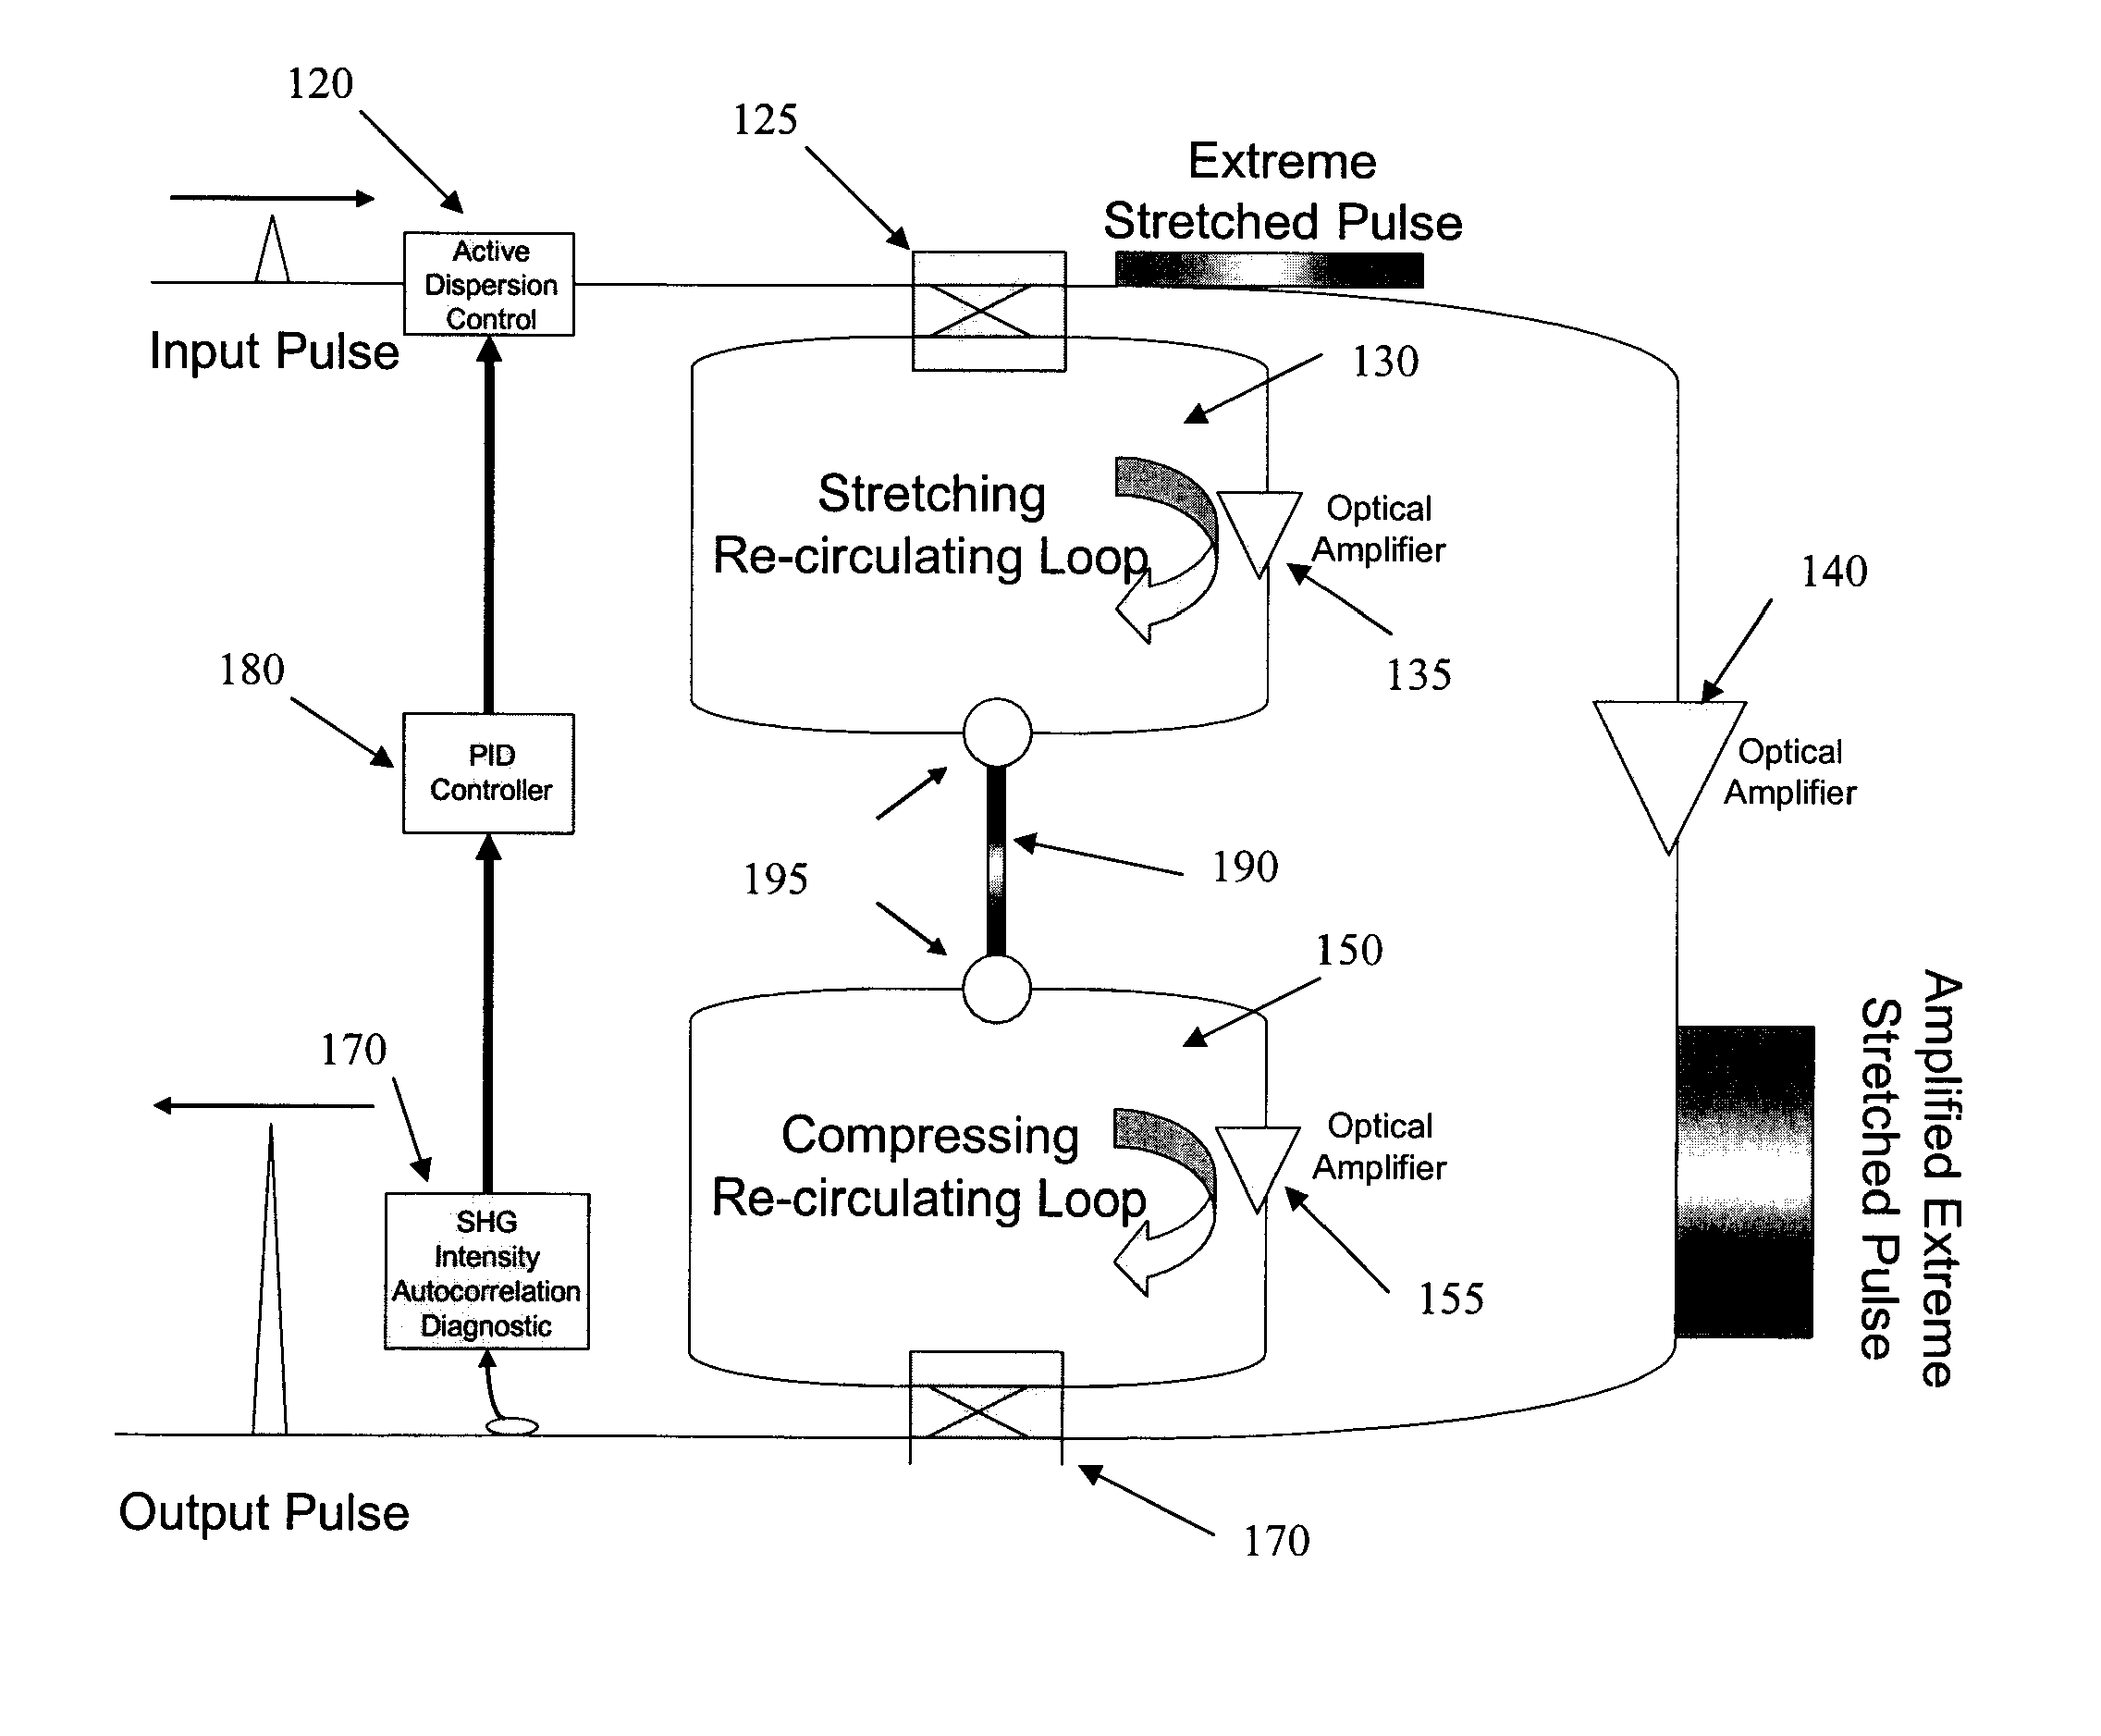 Extreme chirped pulse amplification and phase control